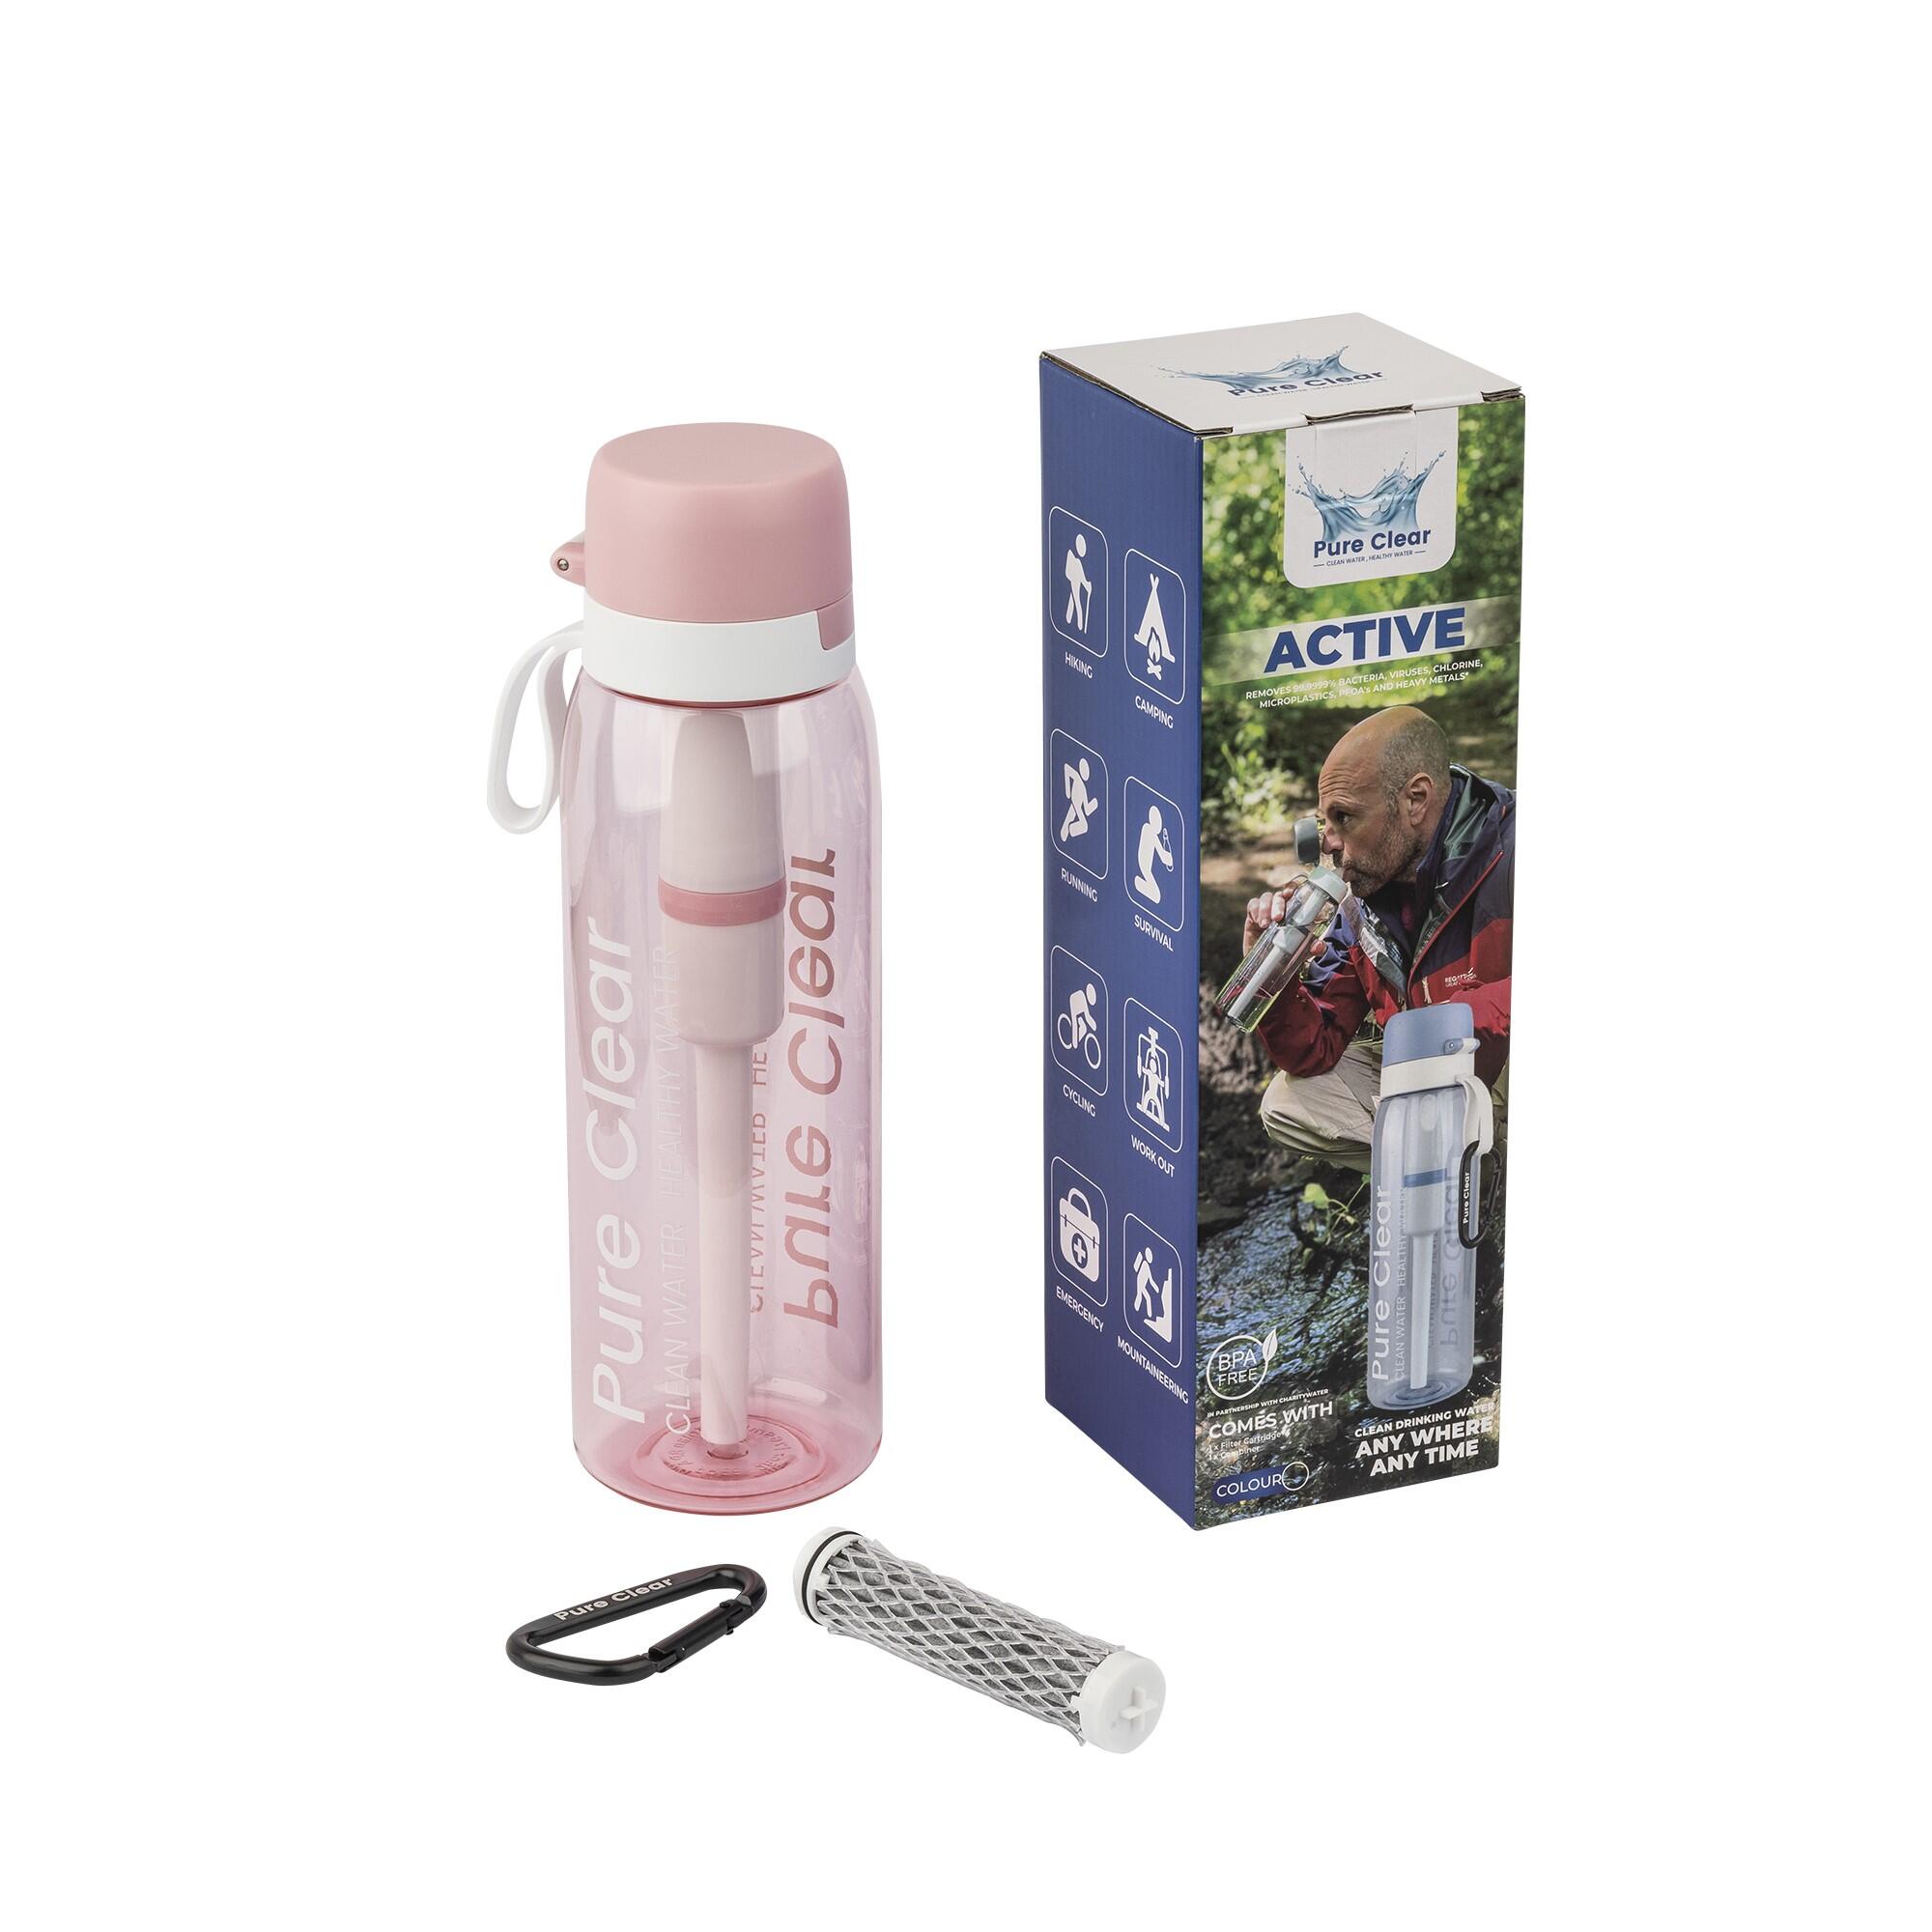 Active Water Filter Bottle - The most advanced water purifier available 3/7